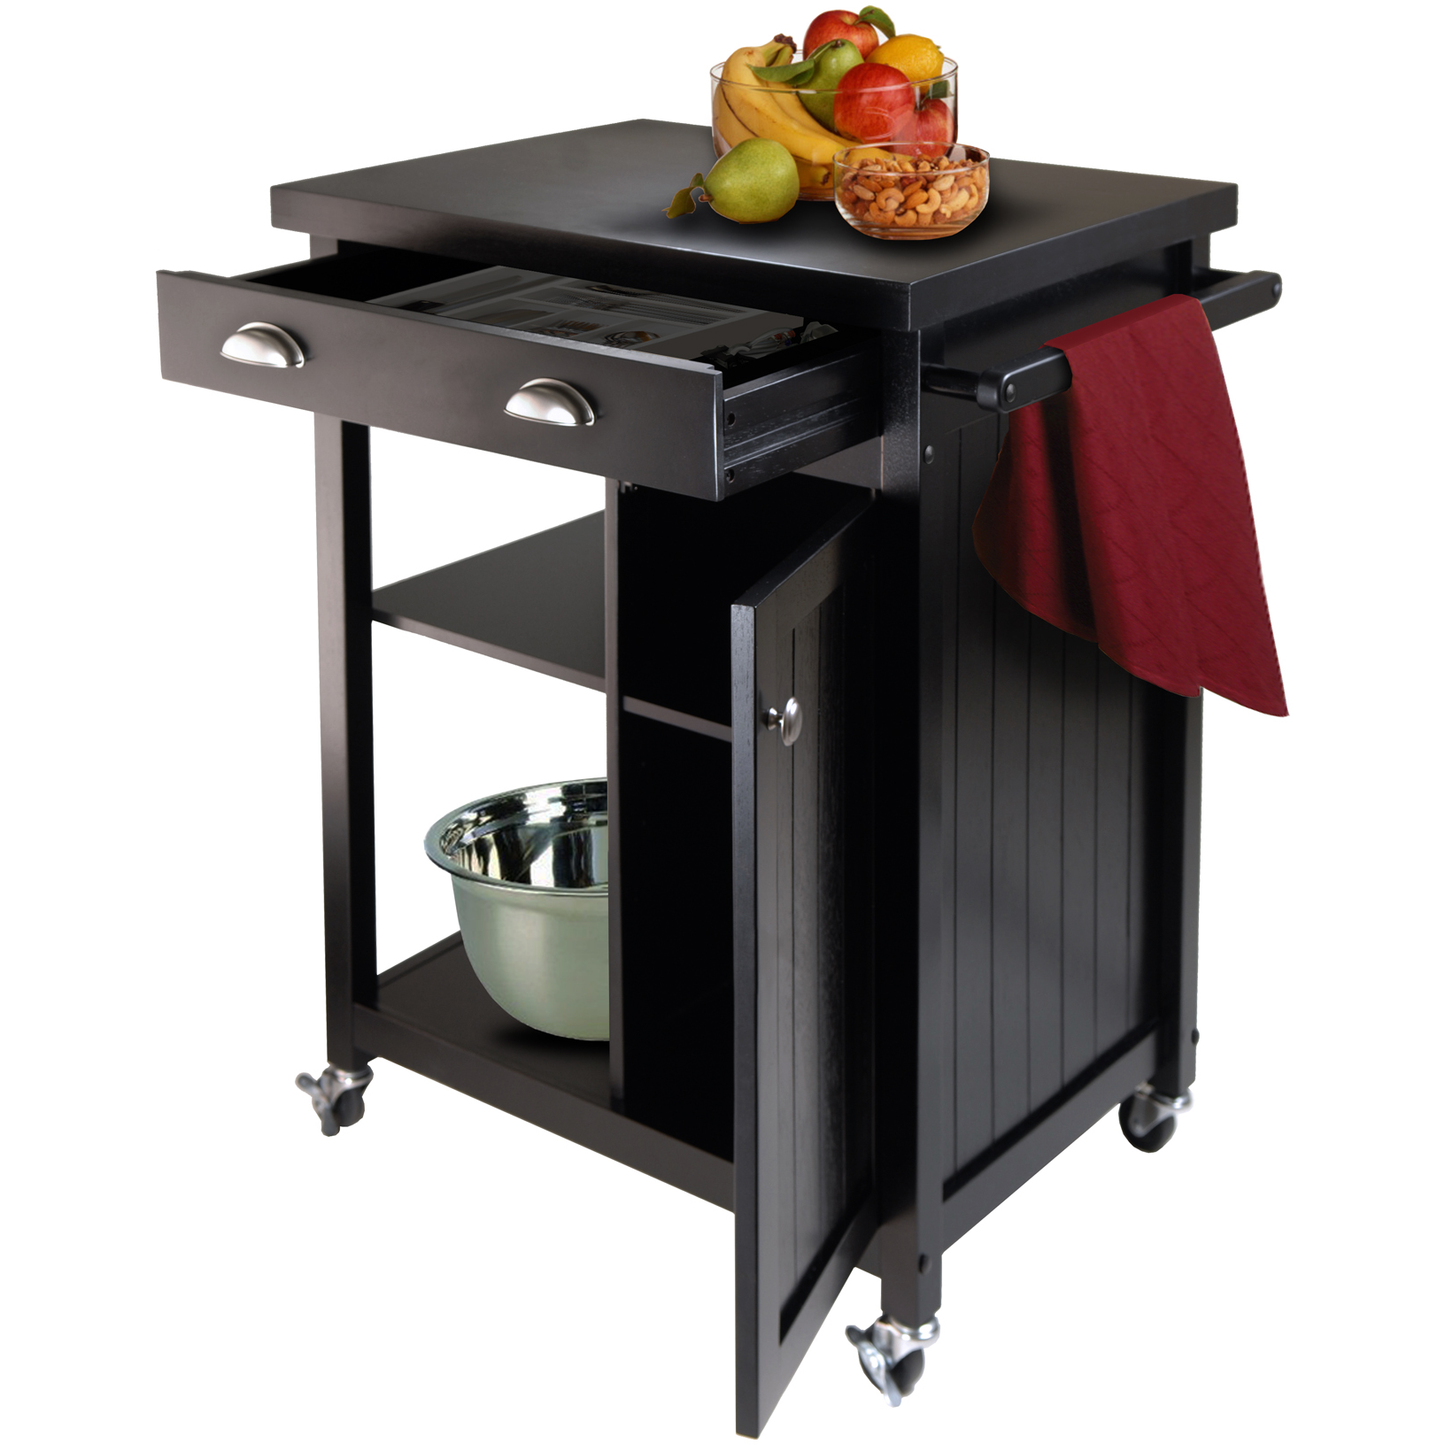 Winsome Timber Kitchen Cart with Wheels and Wainscot Panel - Black -  - 3